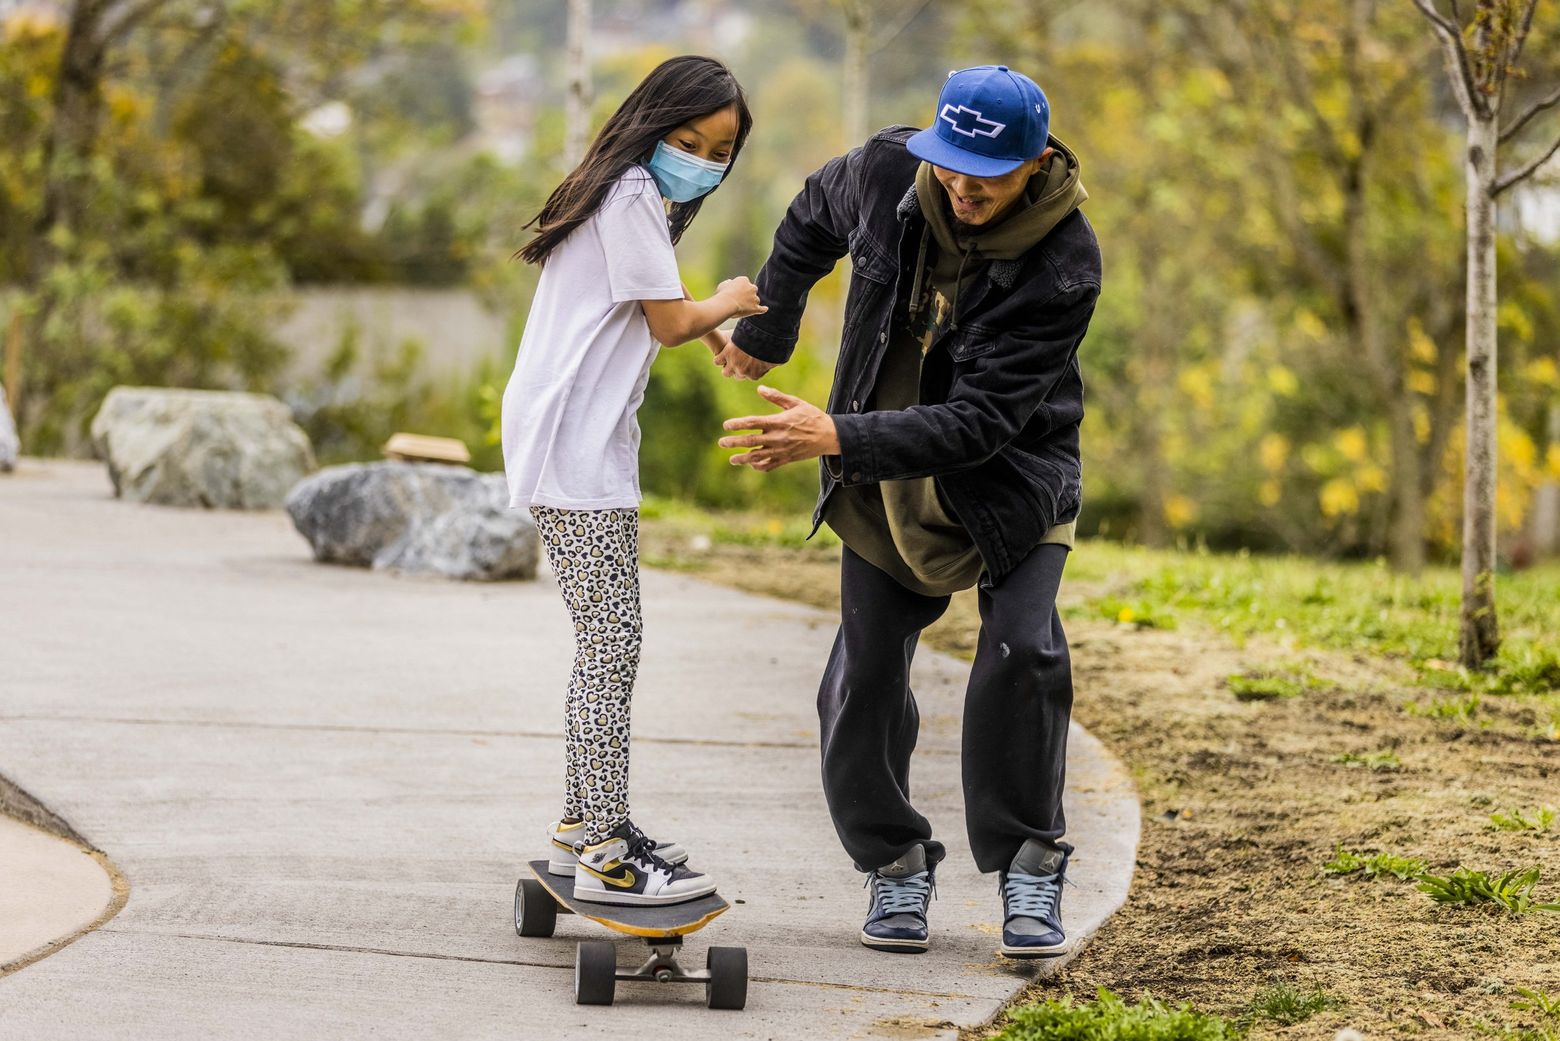 heuvel Of later emotioneel Learning to skateboard, start slow and low | The Seattle Times